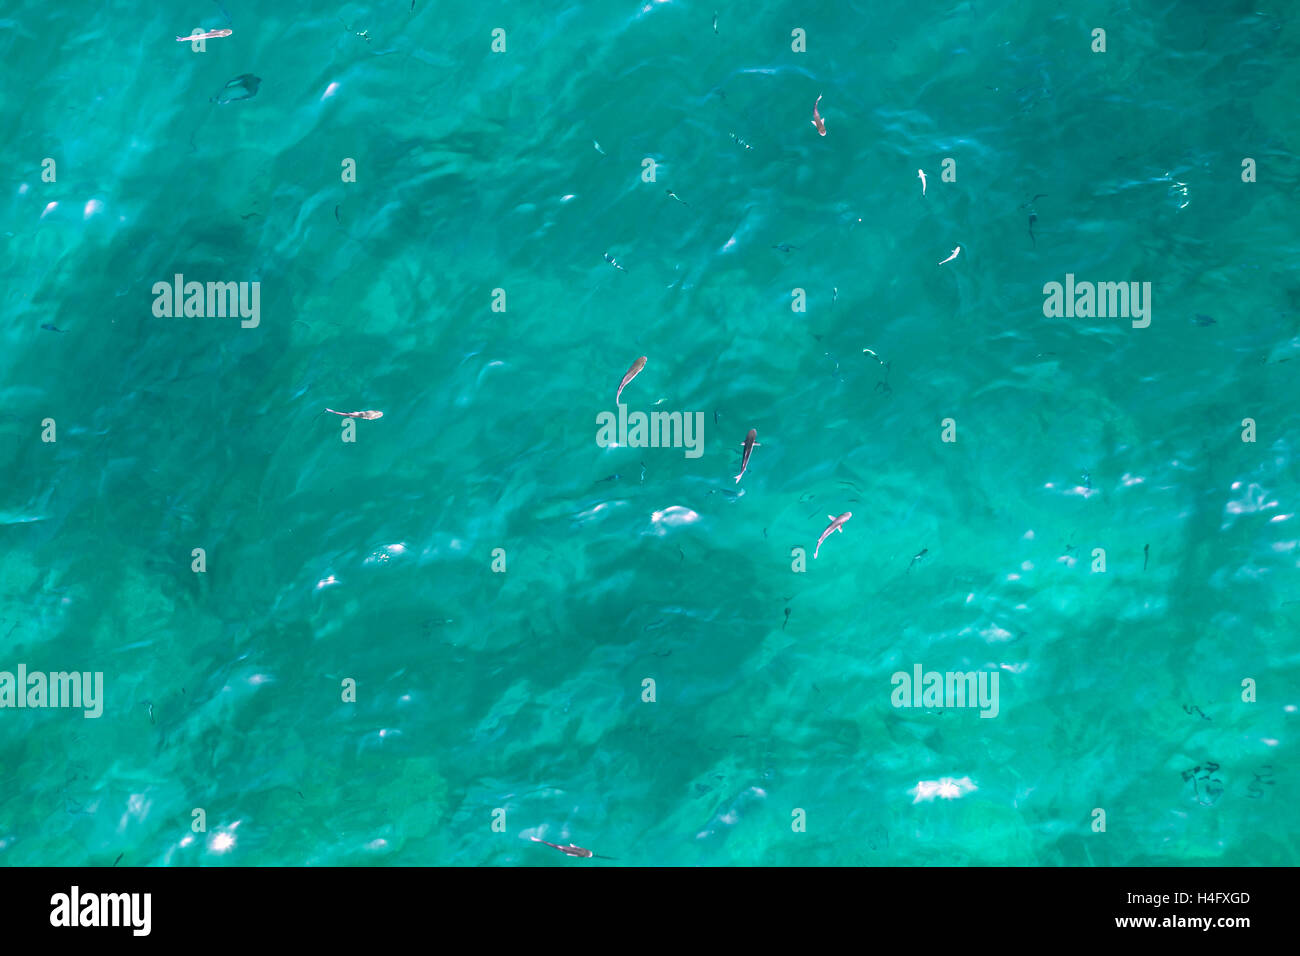 Many fish on the beautiful water surface. Top view of the Alboran Sea in the Strait of Gibraltar. Stock Photo